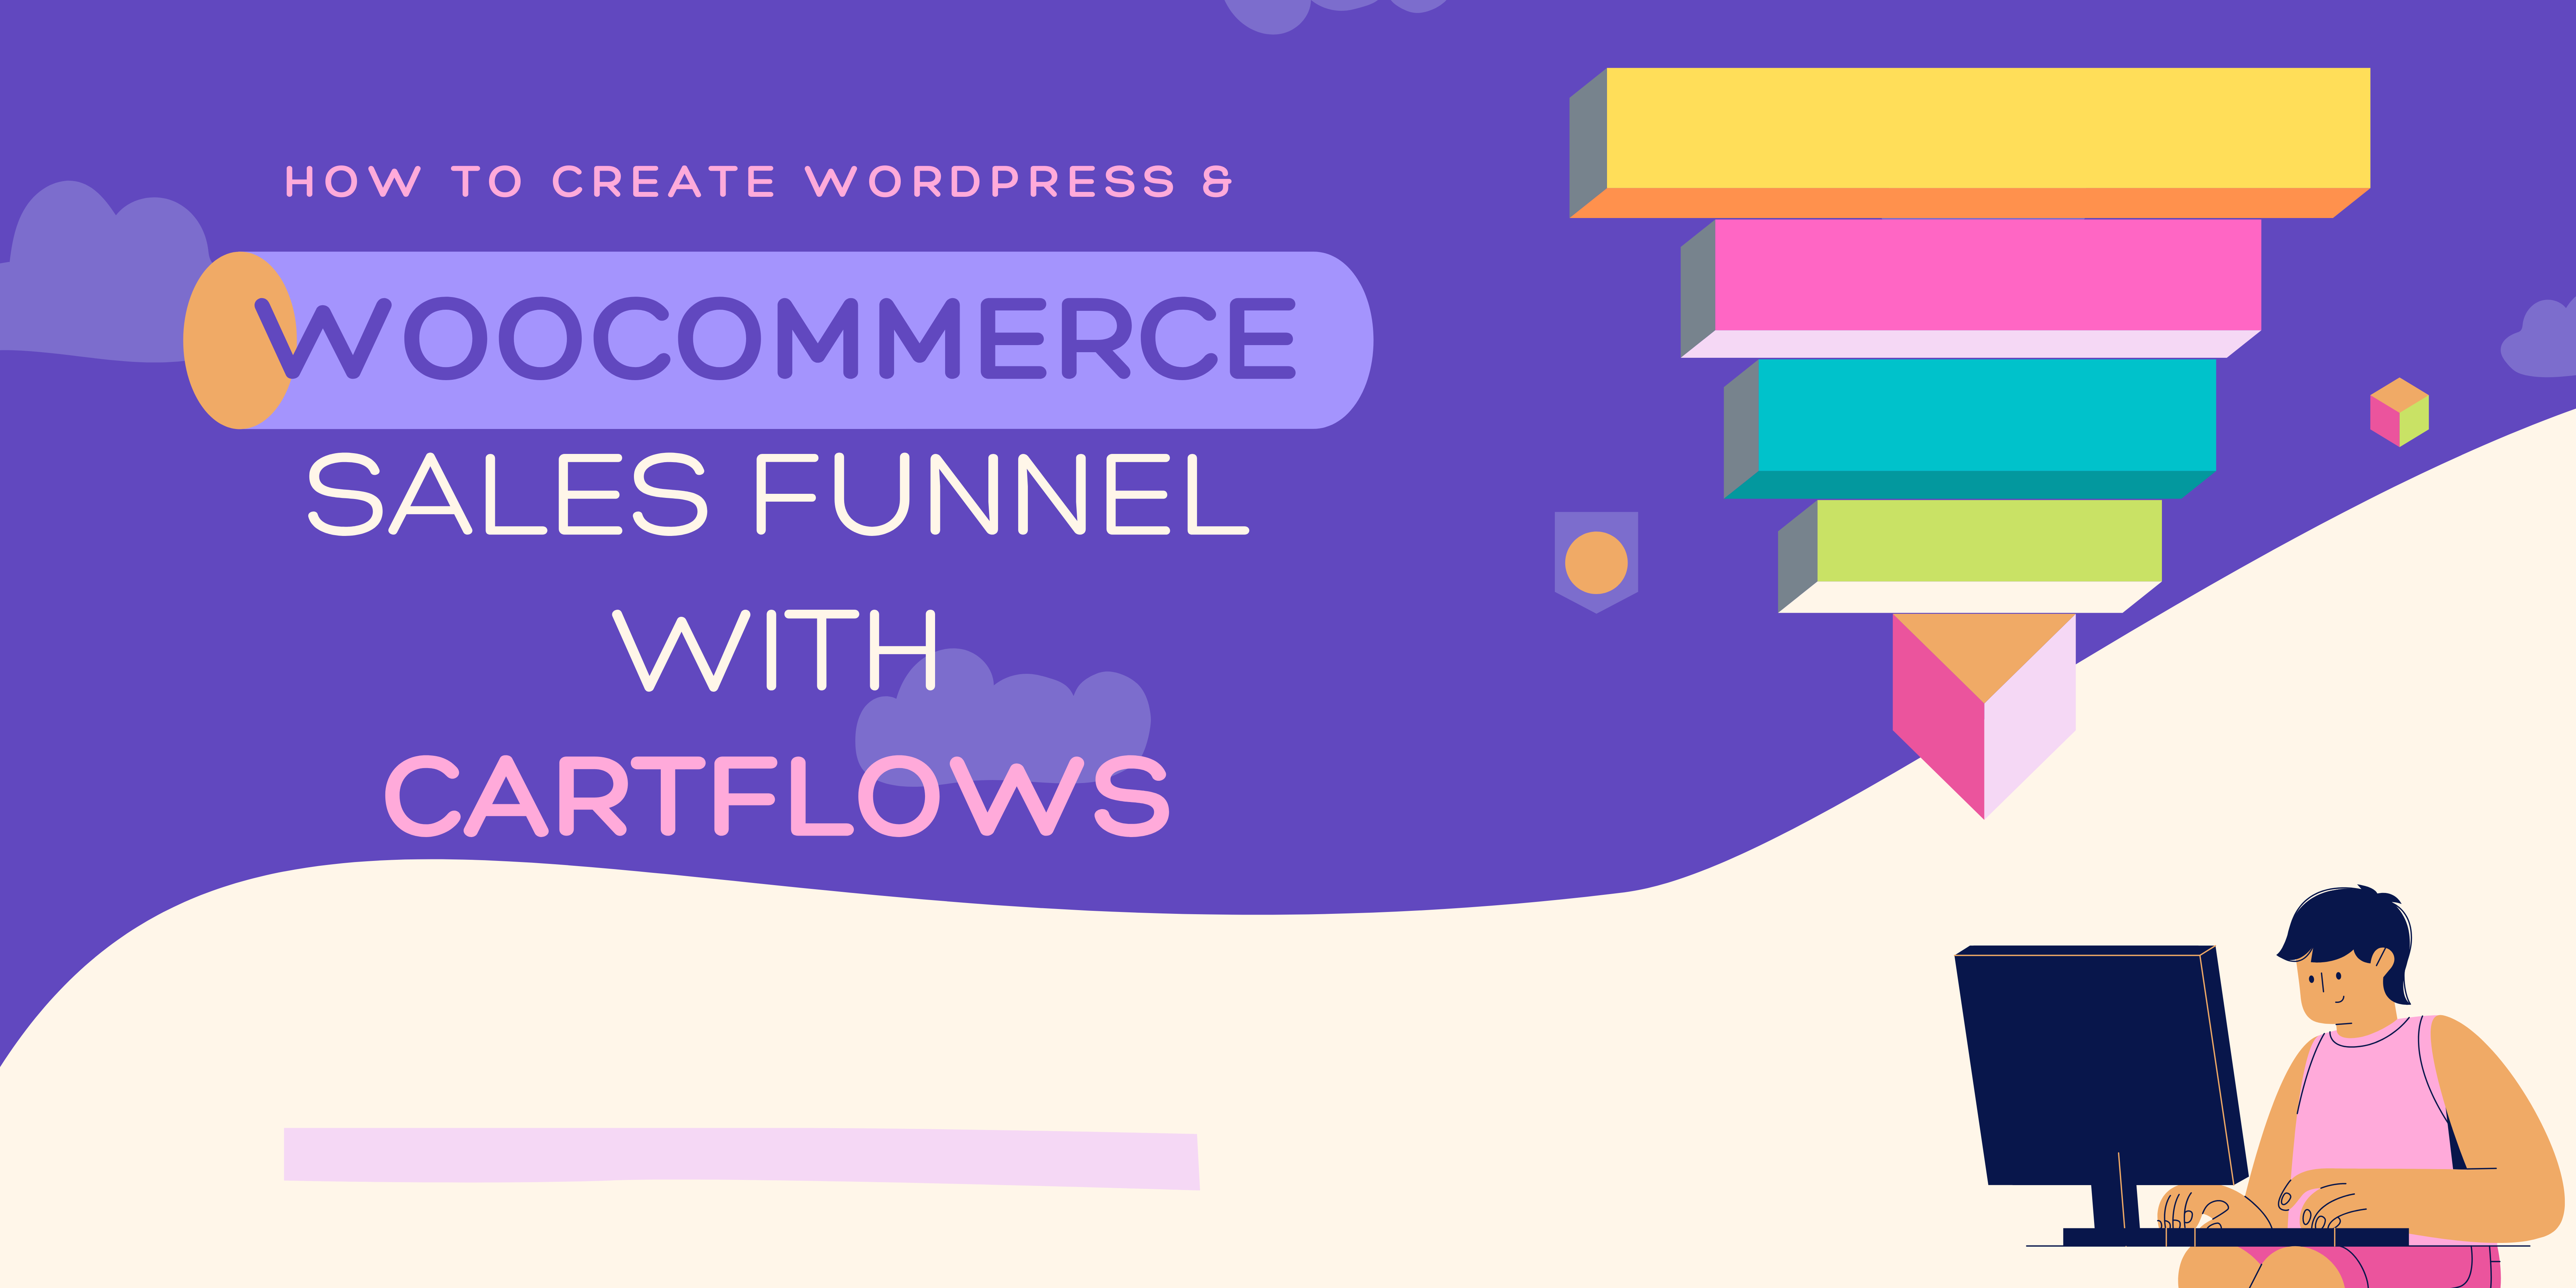 Create WooCommerce Sales Funnel with Cartflows- #1 Sales Funnel Builder